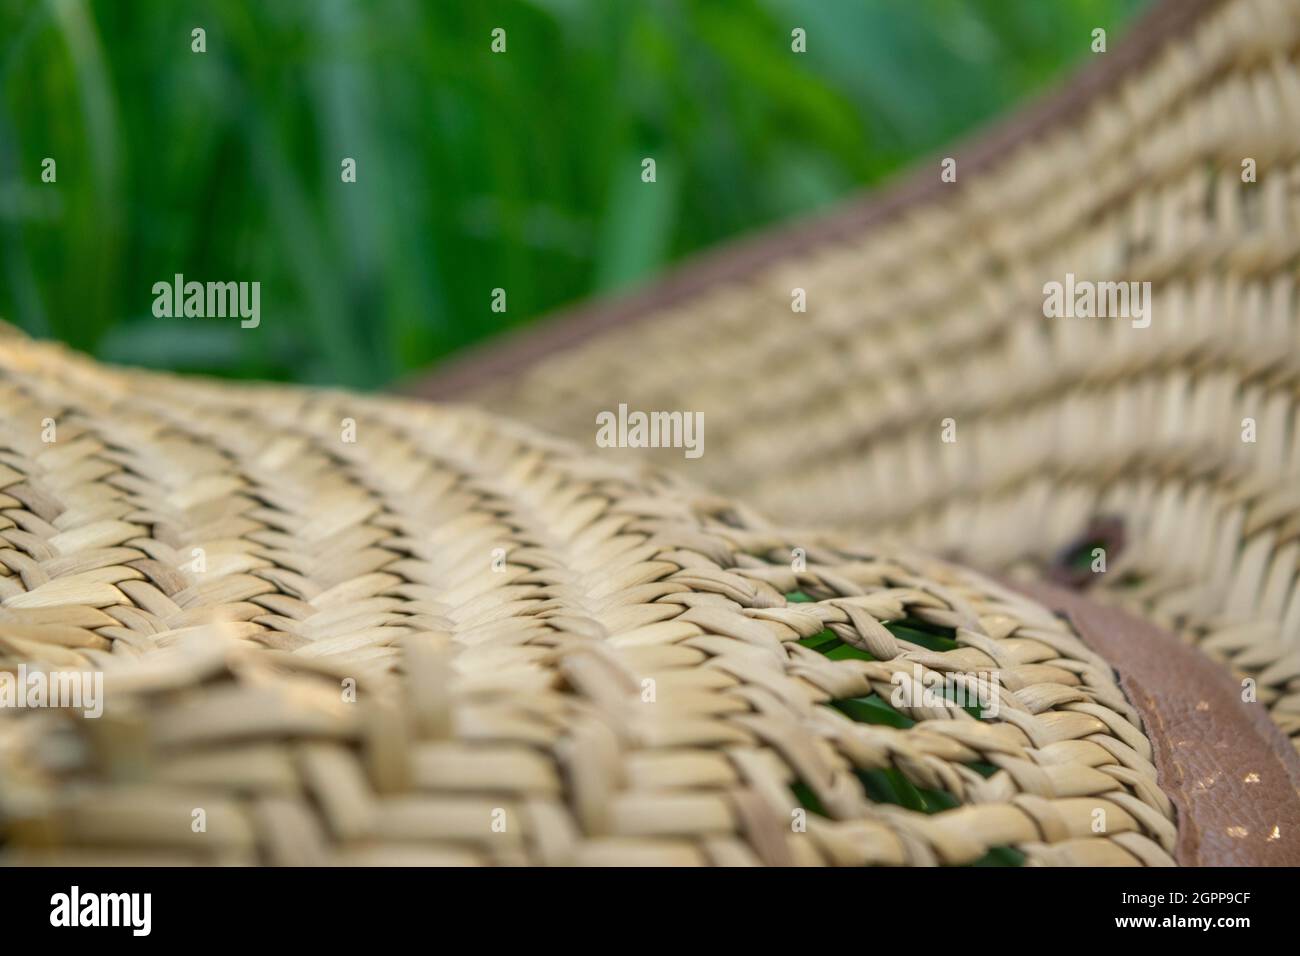 An old straw hat on the green grass, close-up, selective focus Stock Photo